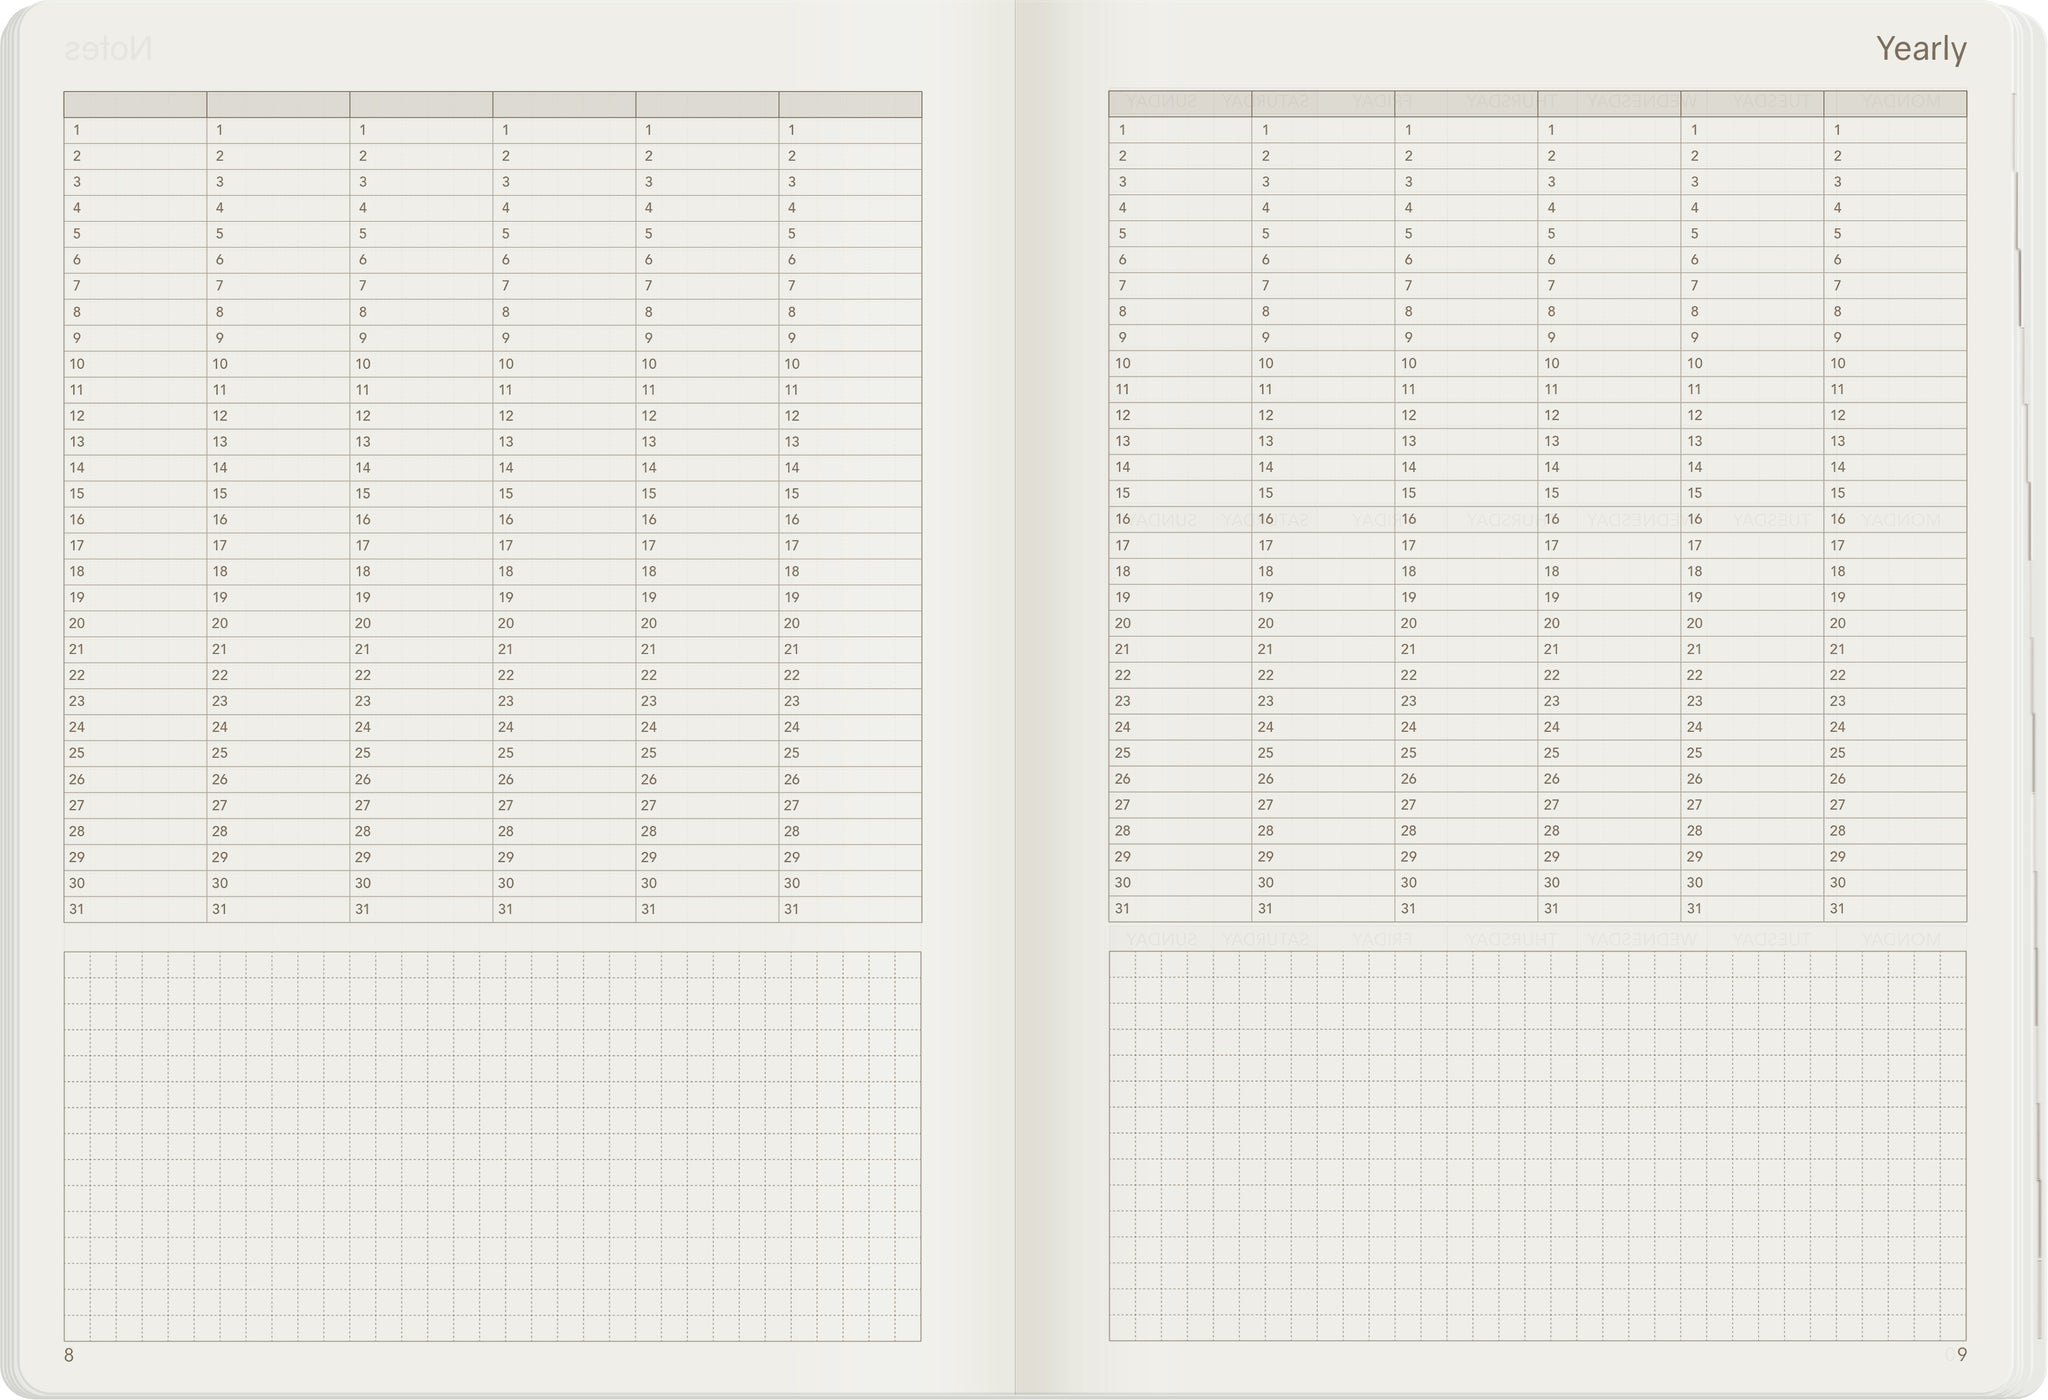 A5 Undated Weekly Planner - Tomoe River Paper - 2022 Edition